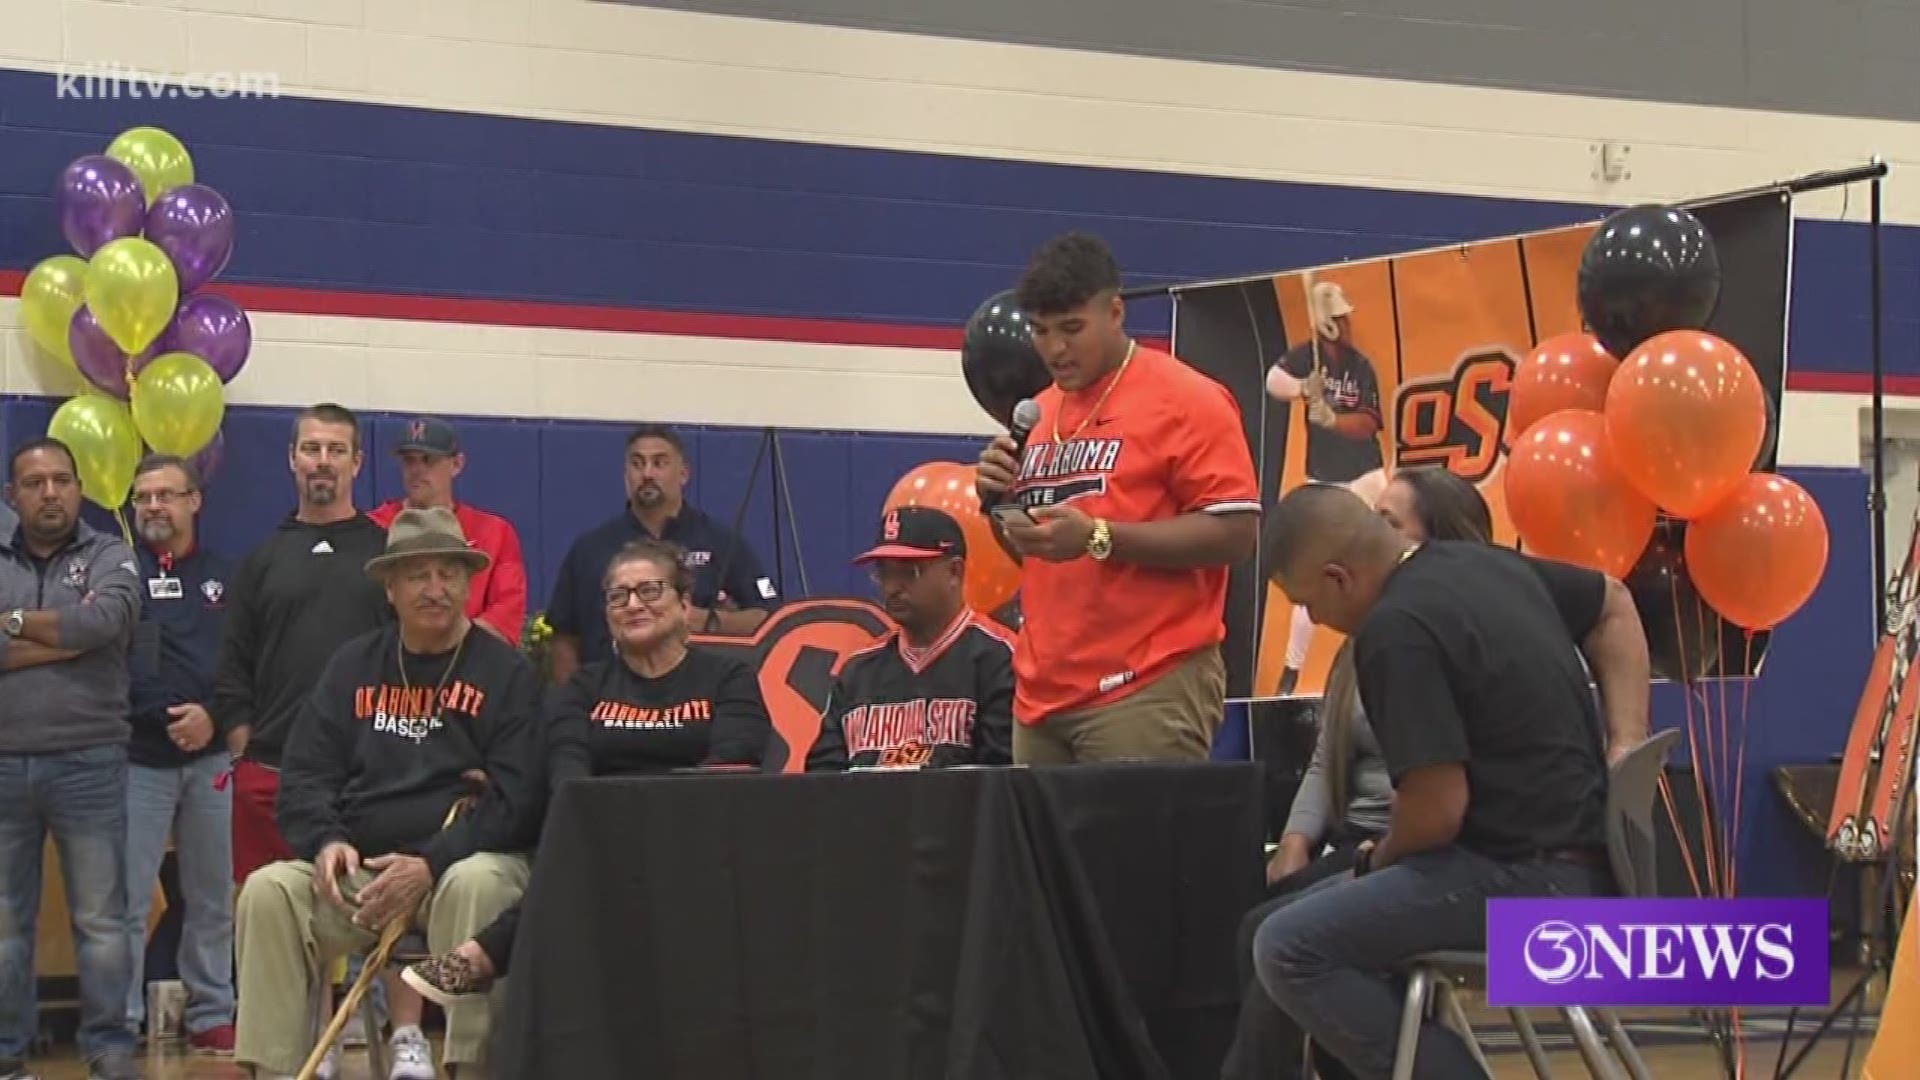 The Eagles signings included three Division I baseball players in MJ Rodriguez (Oklahoma State), Kobe Andrade (Texas A&M) and Matthew Krall (UTRGV).